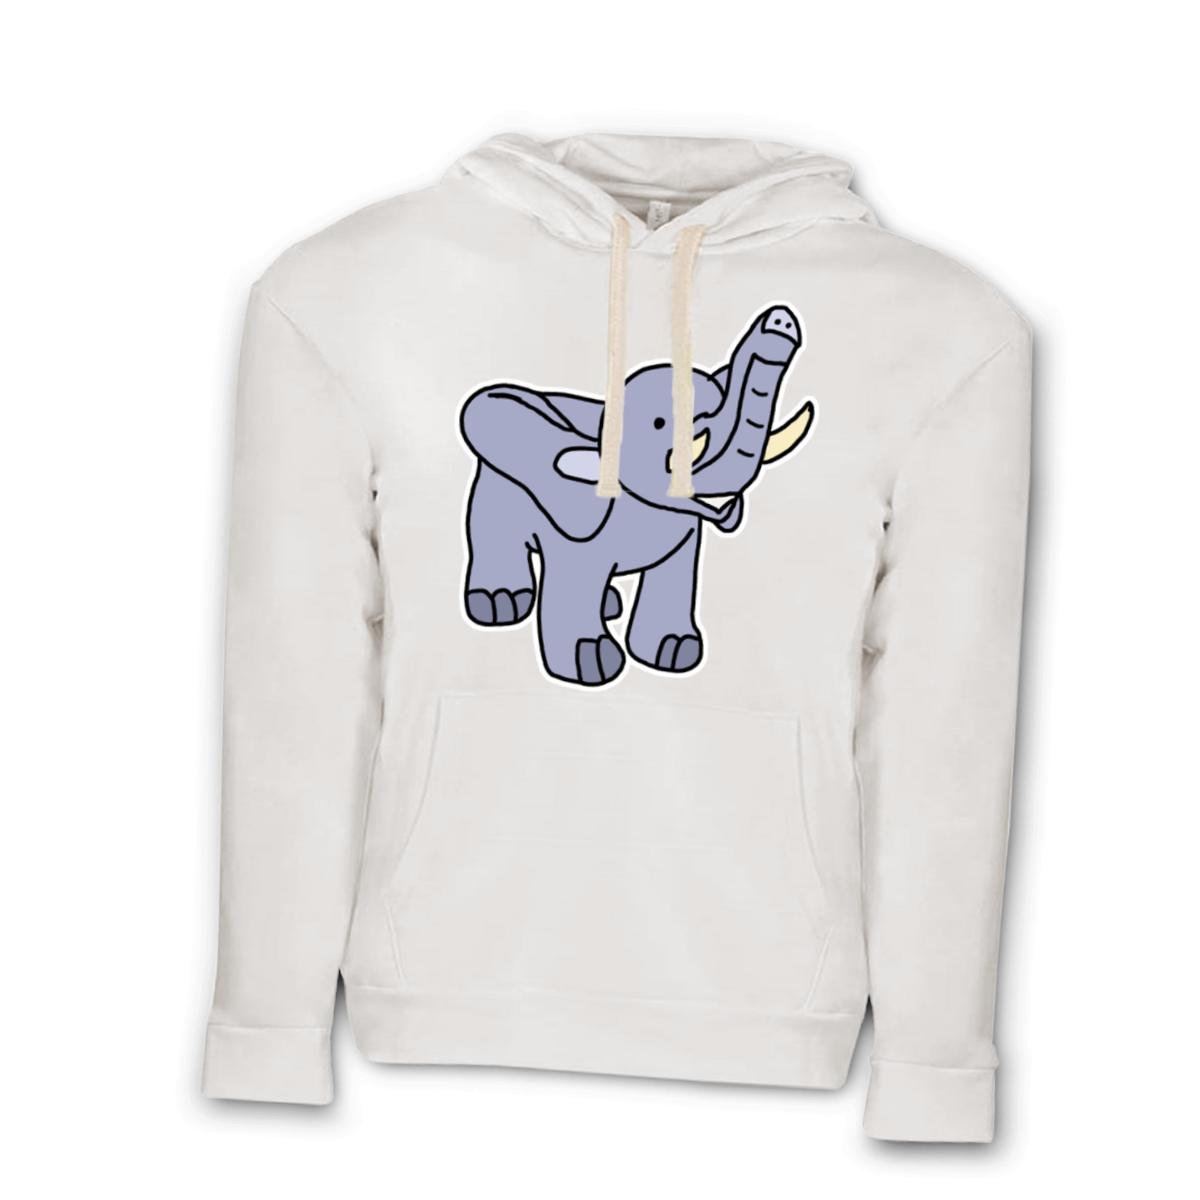 Toy Elephant Unisex Pullover Hoodie Large white